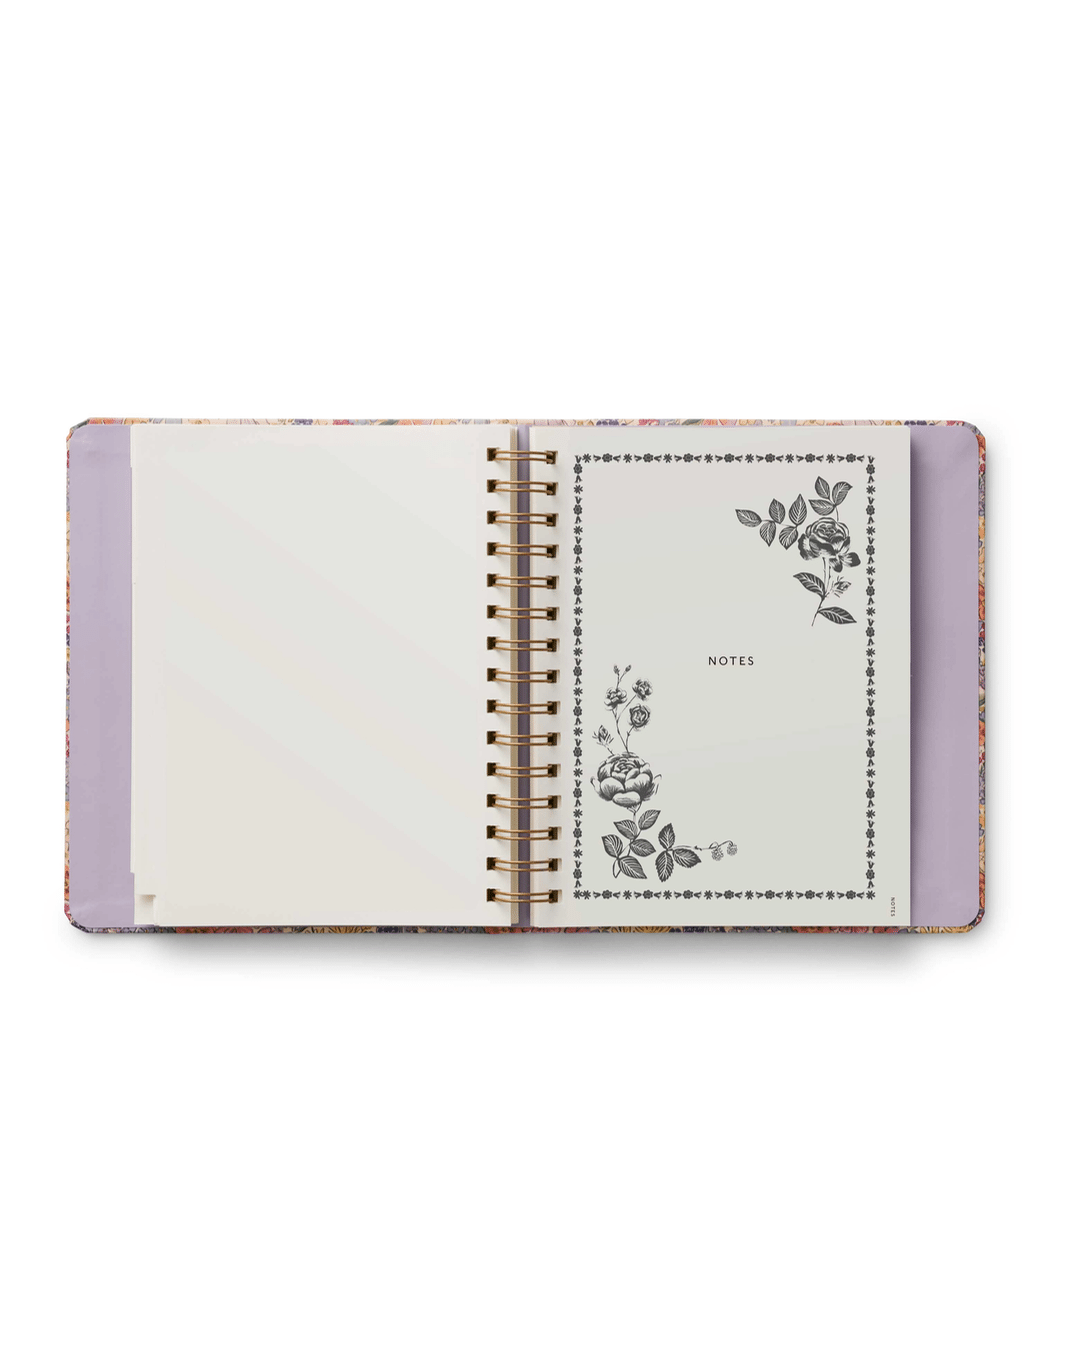 Academic Covered Planner 2025 - Mimi